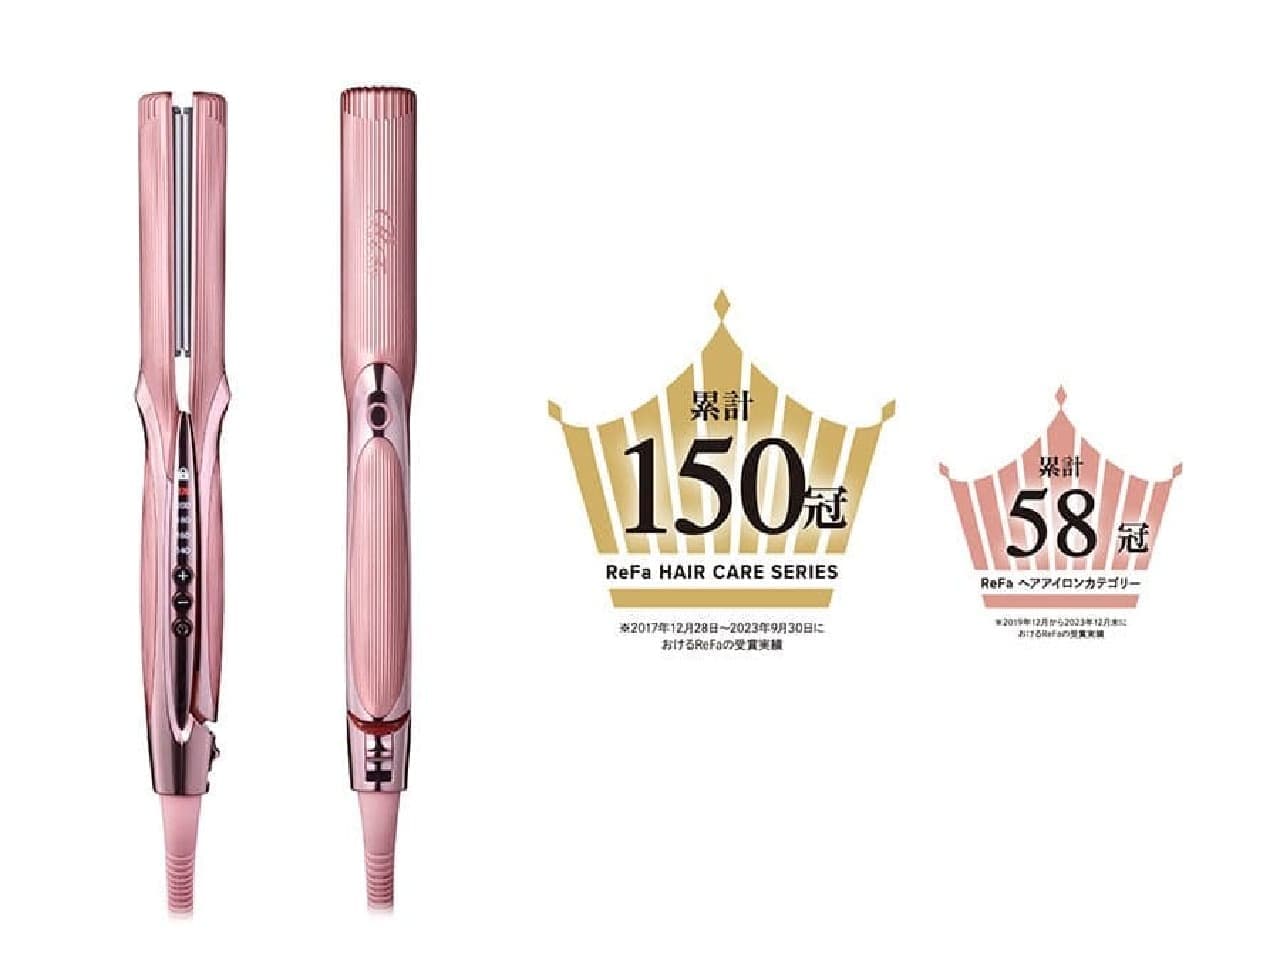 MTG's beauty brand "ReFa" will be releasing a new pink "ReFa STRAIGHT IRON PRO" on April 17th. Achieve salon-quality straight hair at home Image 1